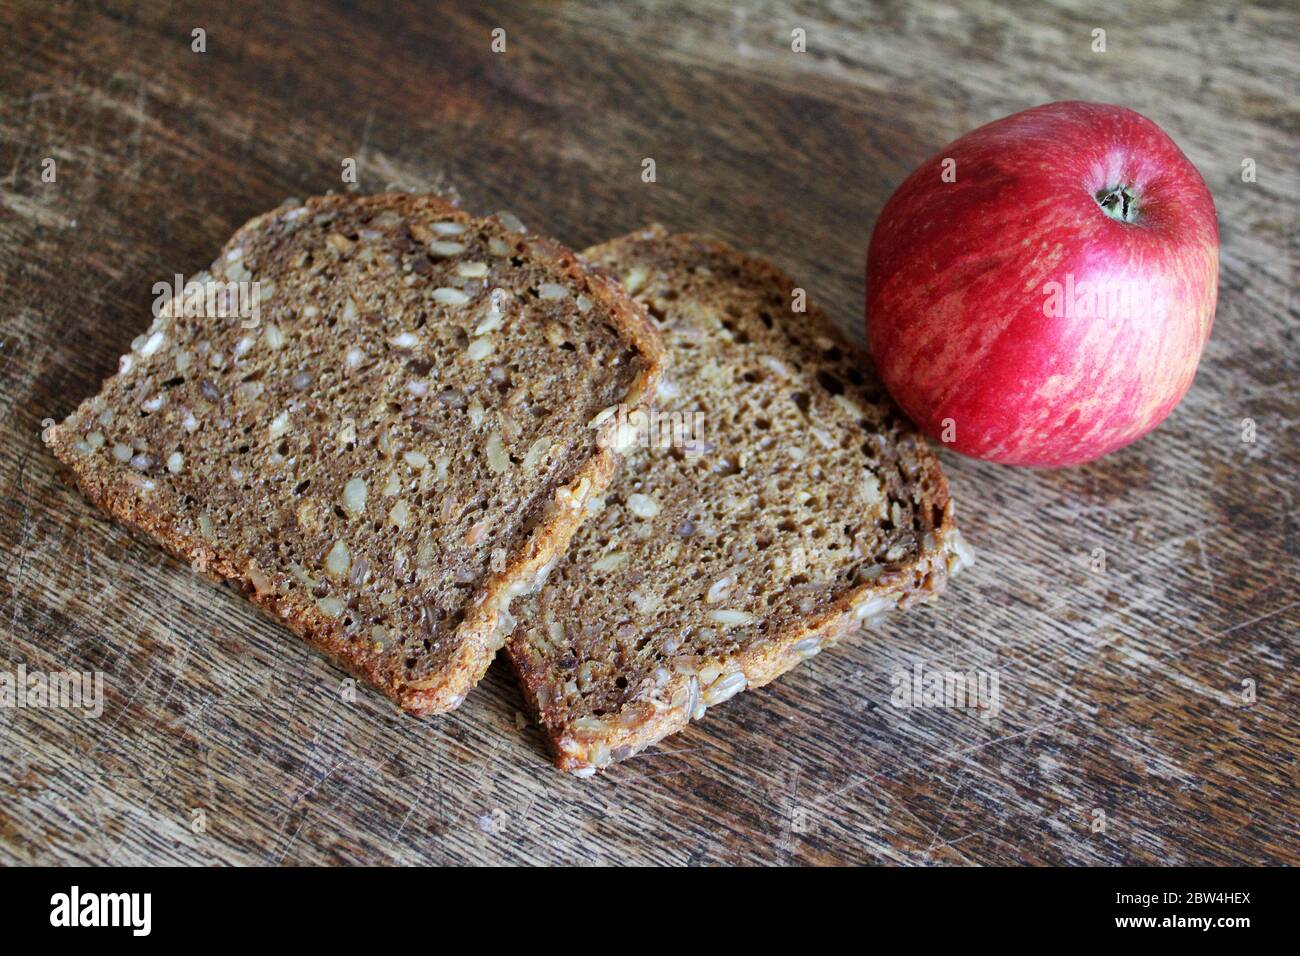 Slices of dark bread with corn and a red apple on a kitchen table Stock Photo